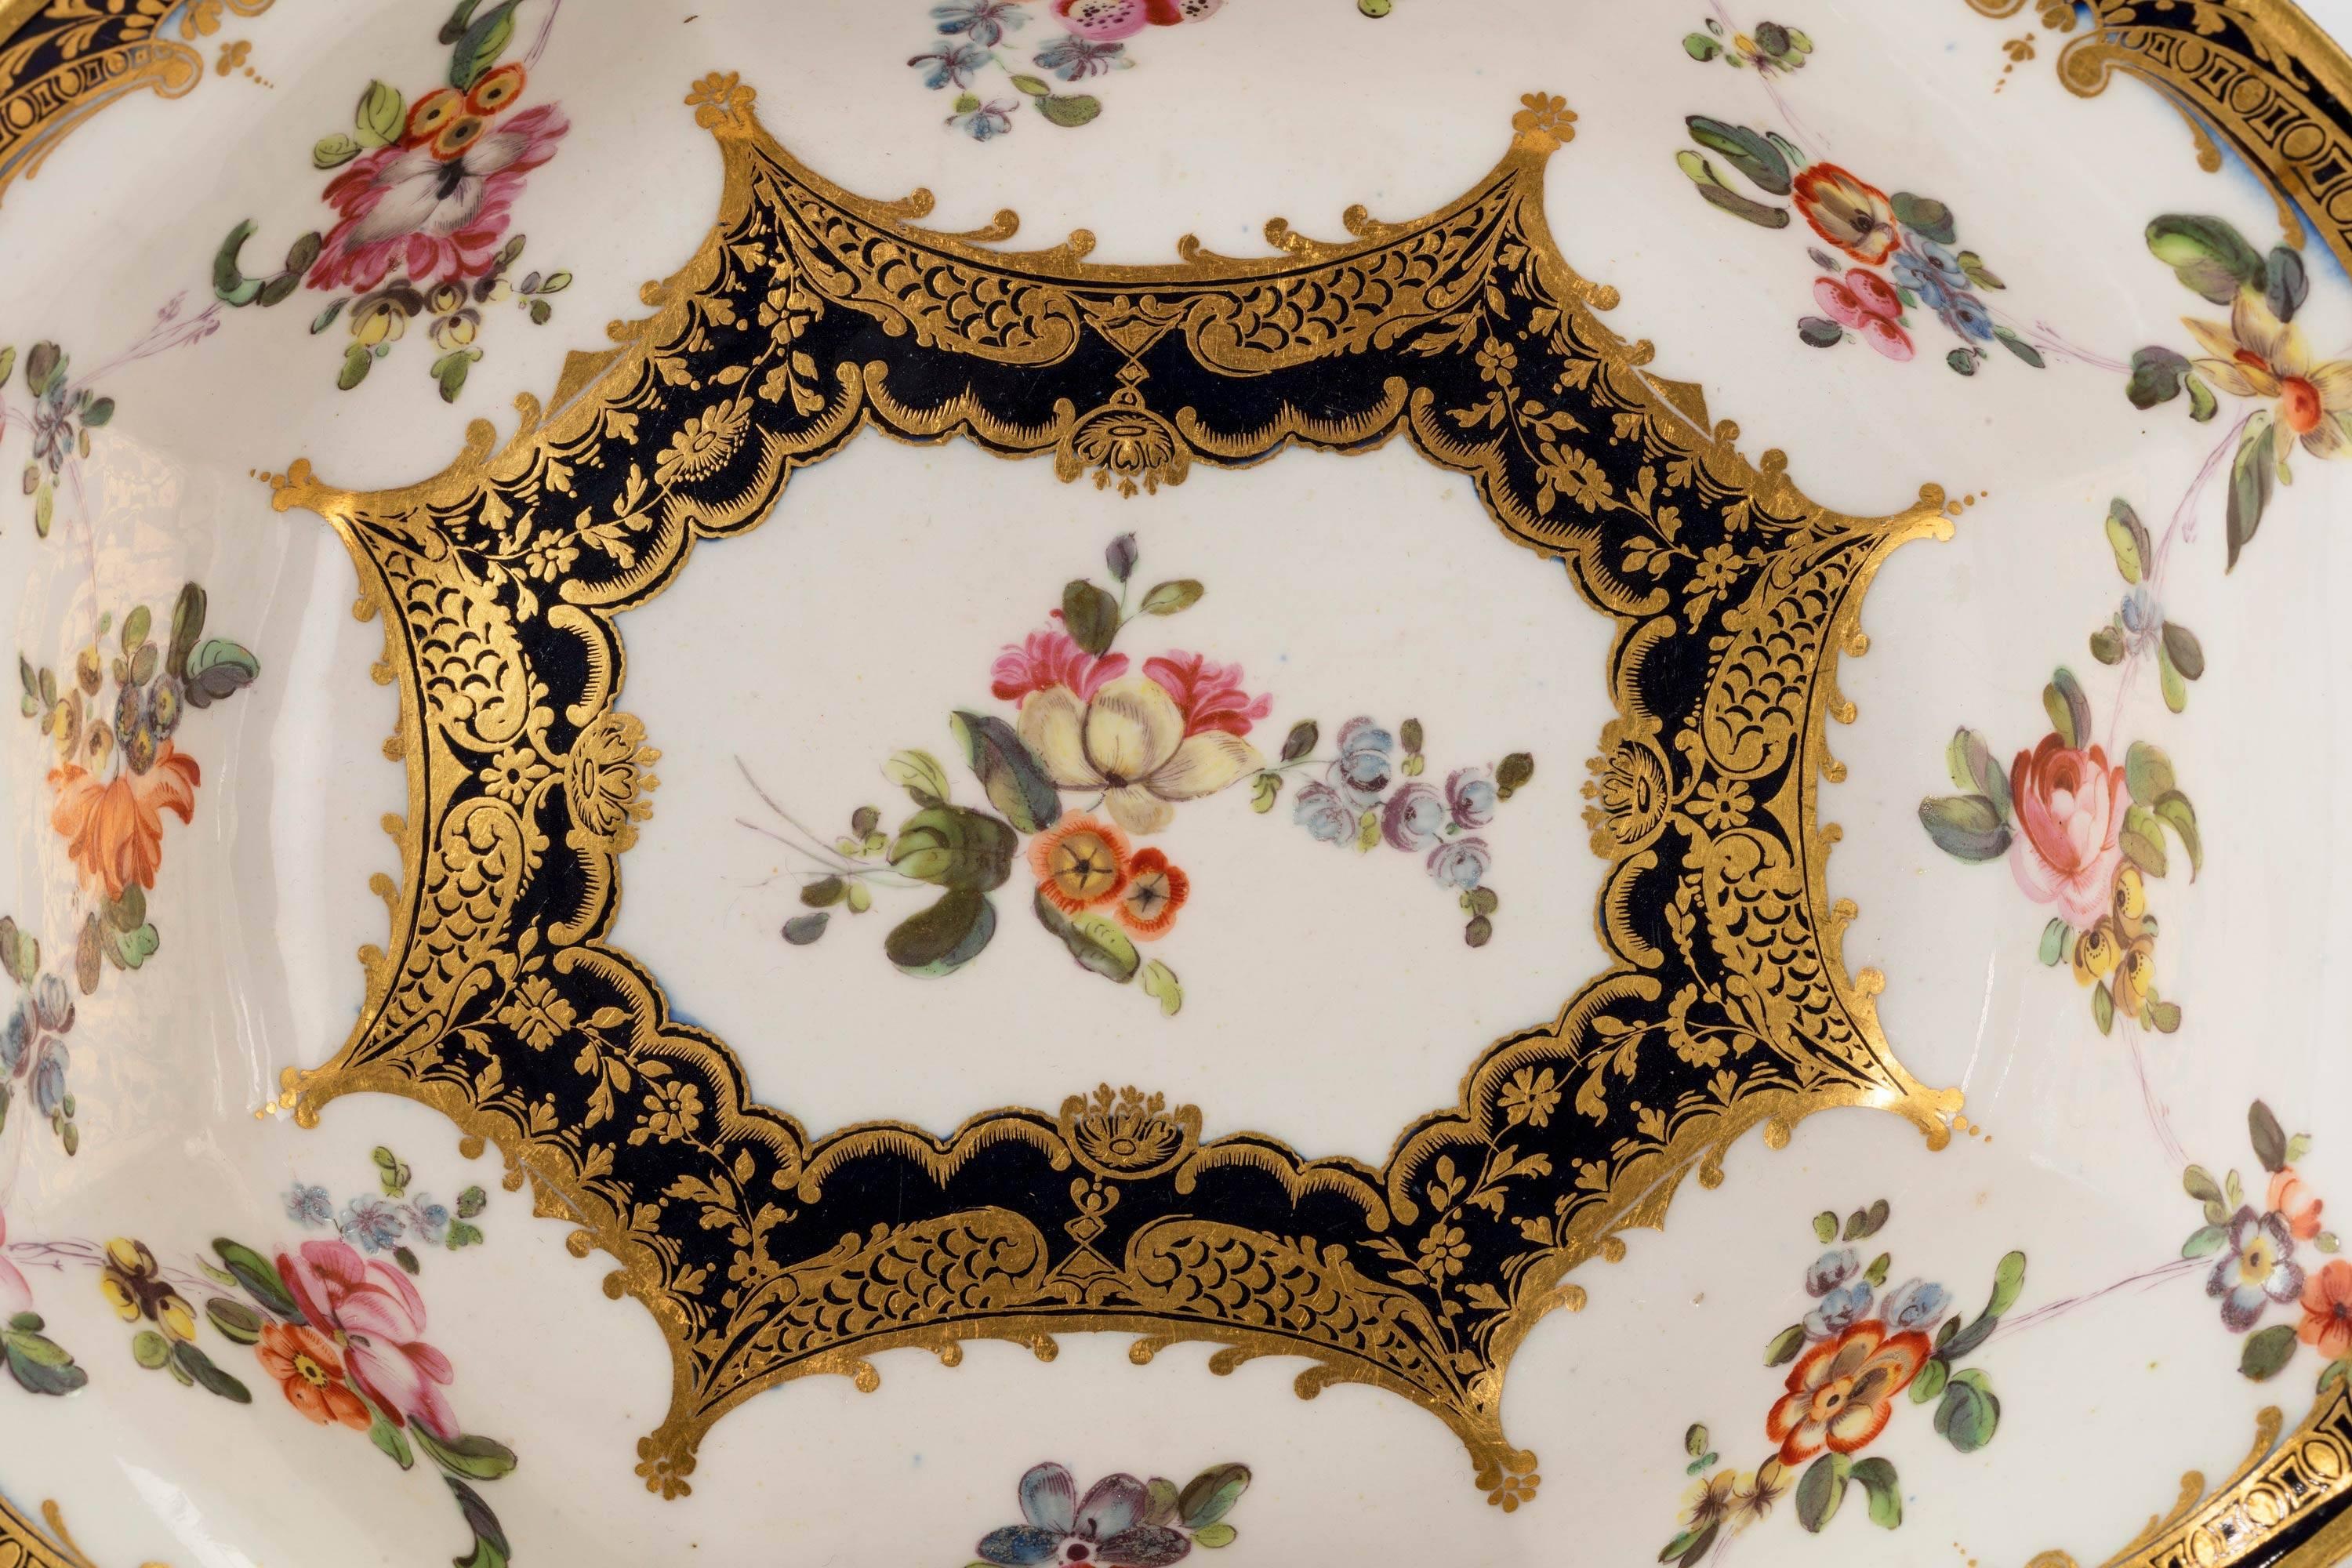 Chamberlain Worcester Porcelain octagonal bowl. Enameled with swaths of flowers and with particularly fine gilding. Excellent unrubbed condition.